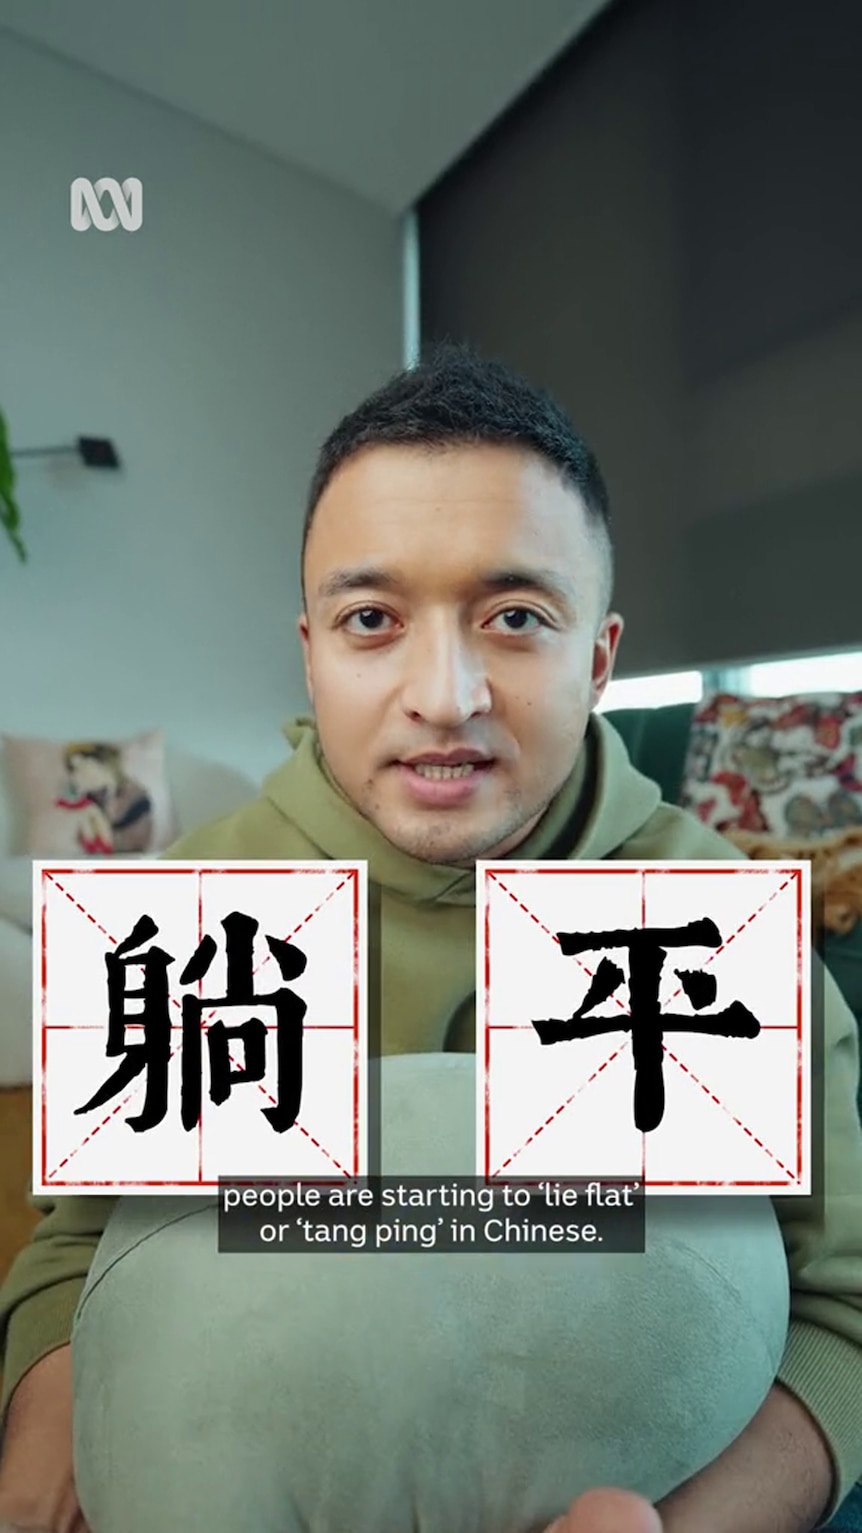 A young Asian man with short hair looks down the lens with two Chinese characters superimposed in front of him